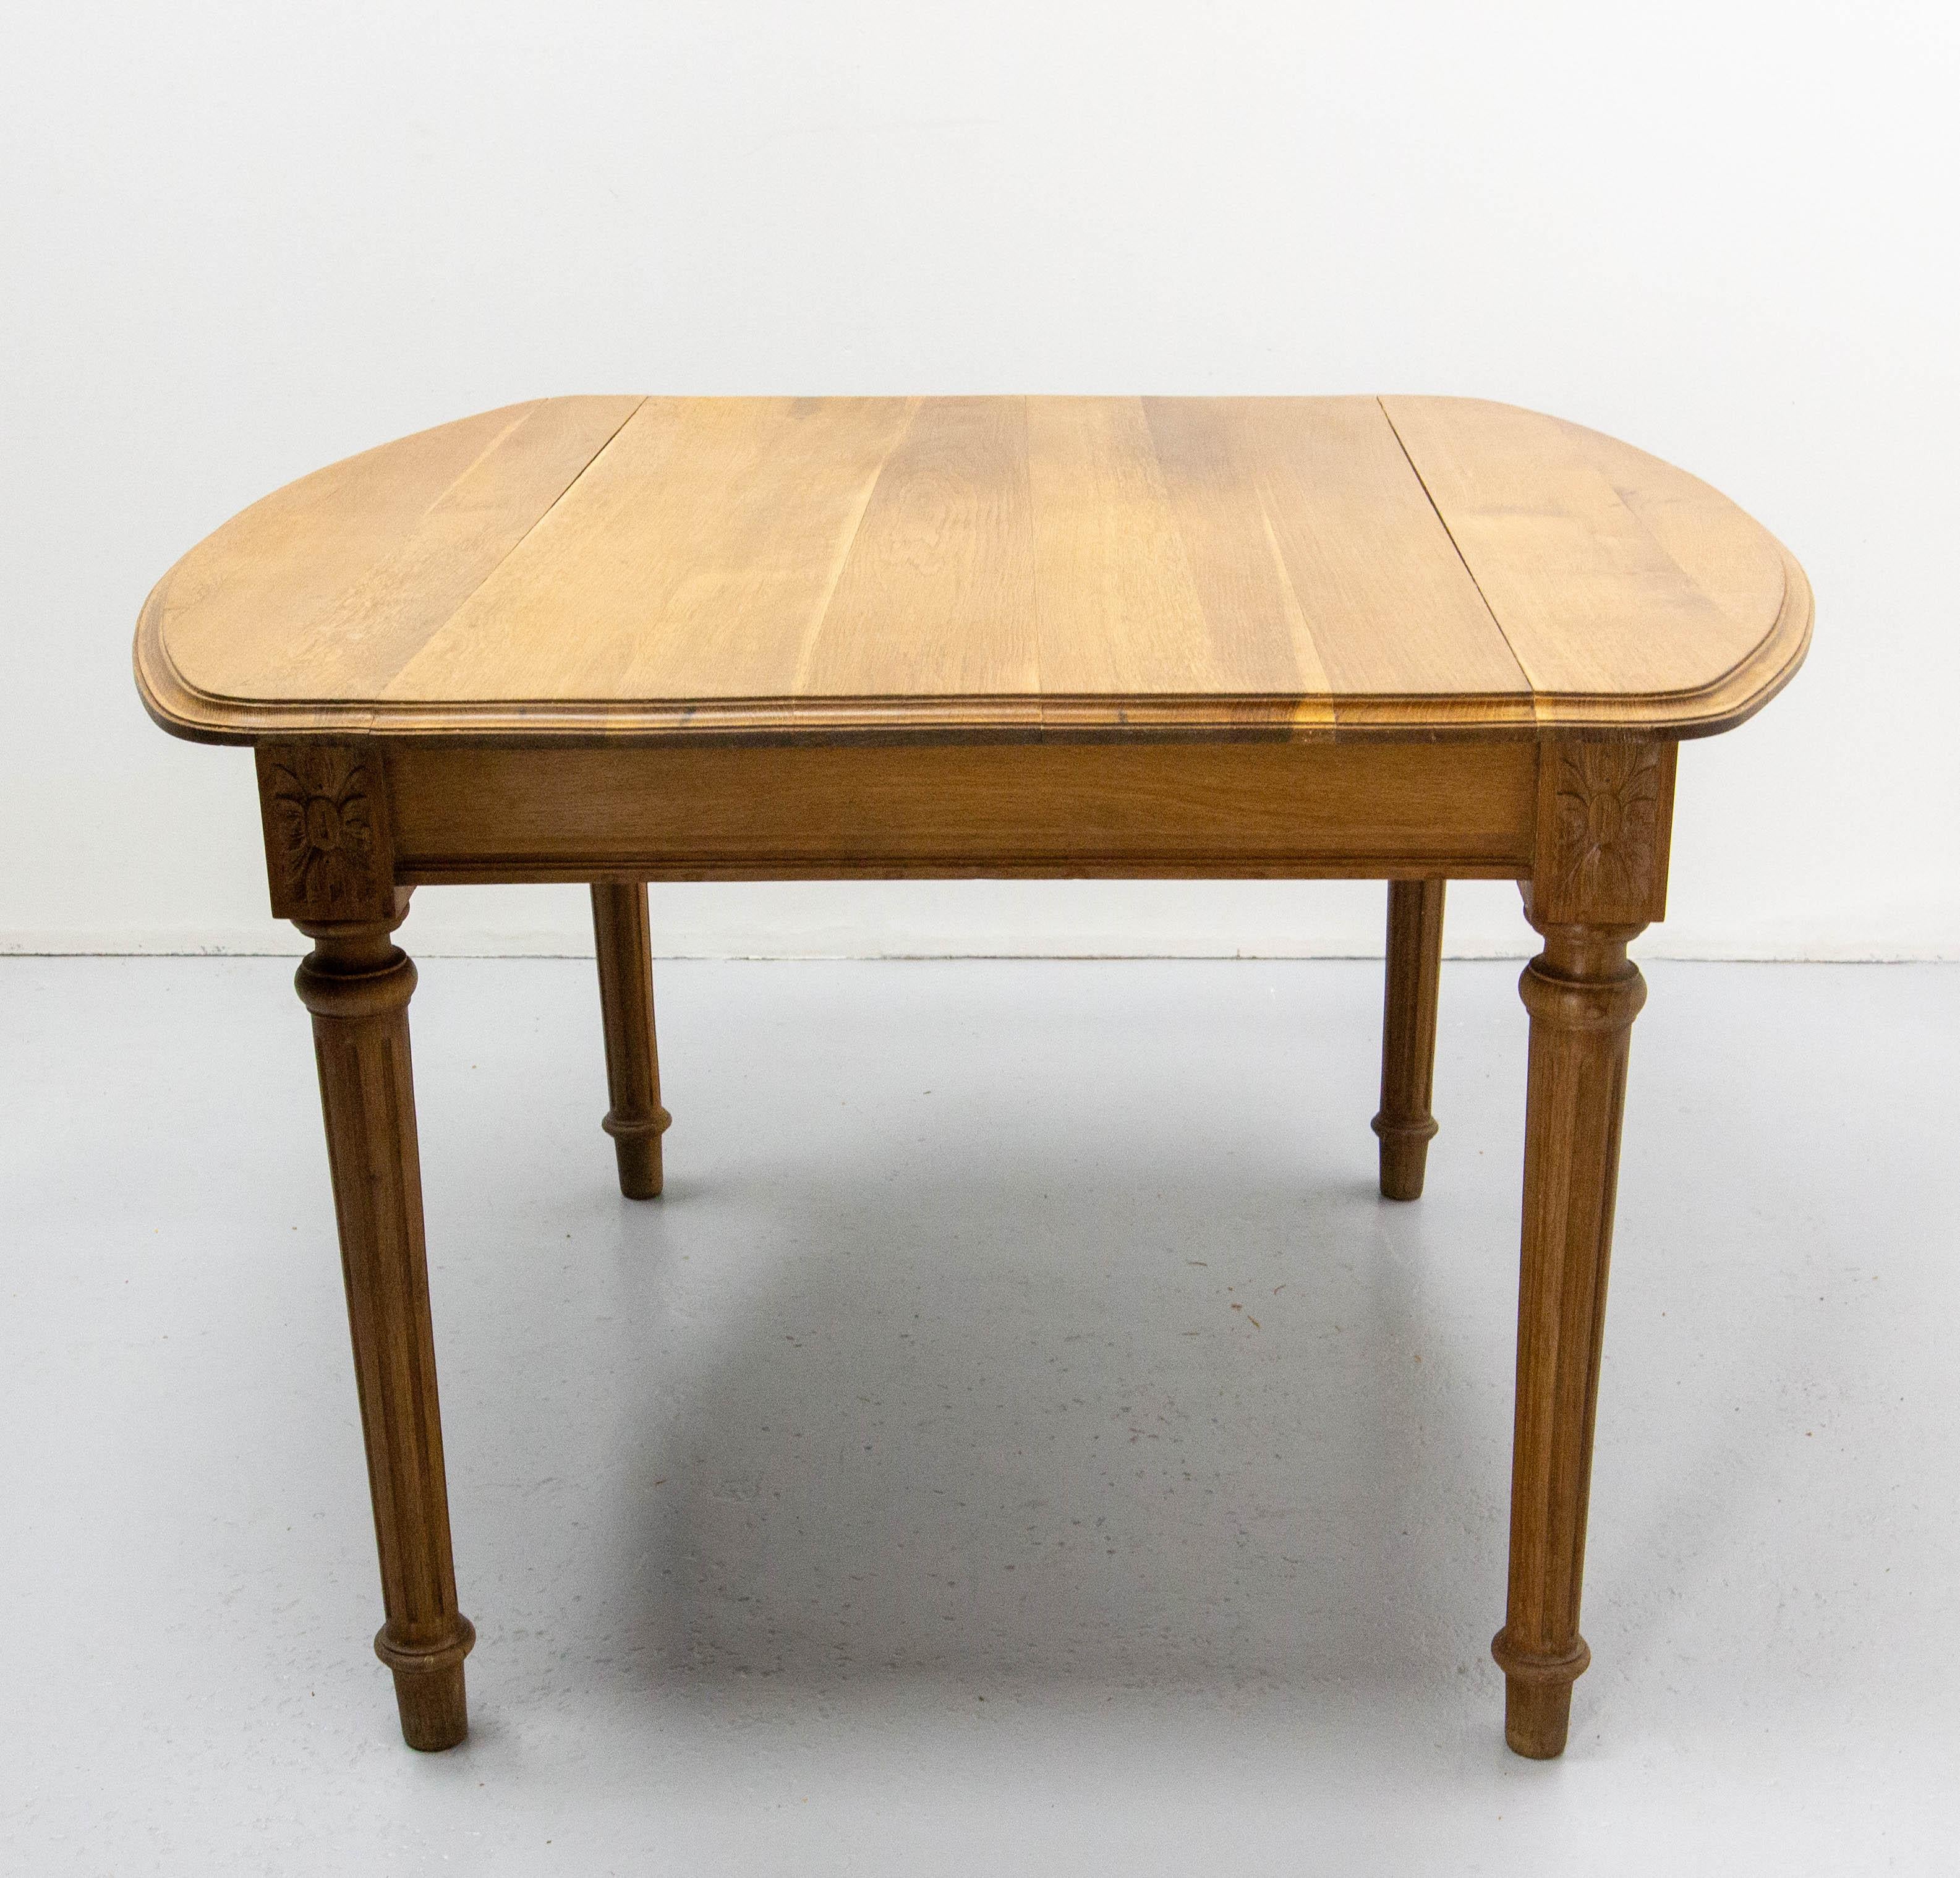 This walnut dining table in the Louis XVI style was made in France.
Without the extensions this table is 44.46 in. (112 cm) long with the extensions it measures 75.39 in. (191.5 cm)
The extensions of the table are the originals they were not made in